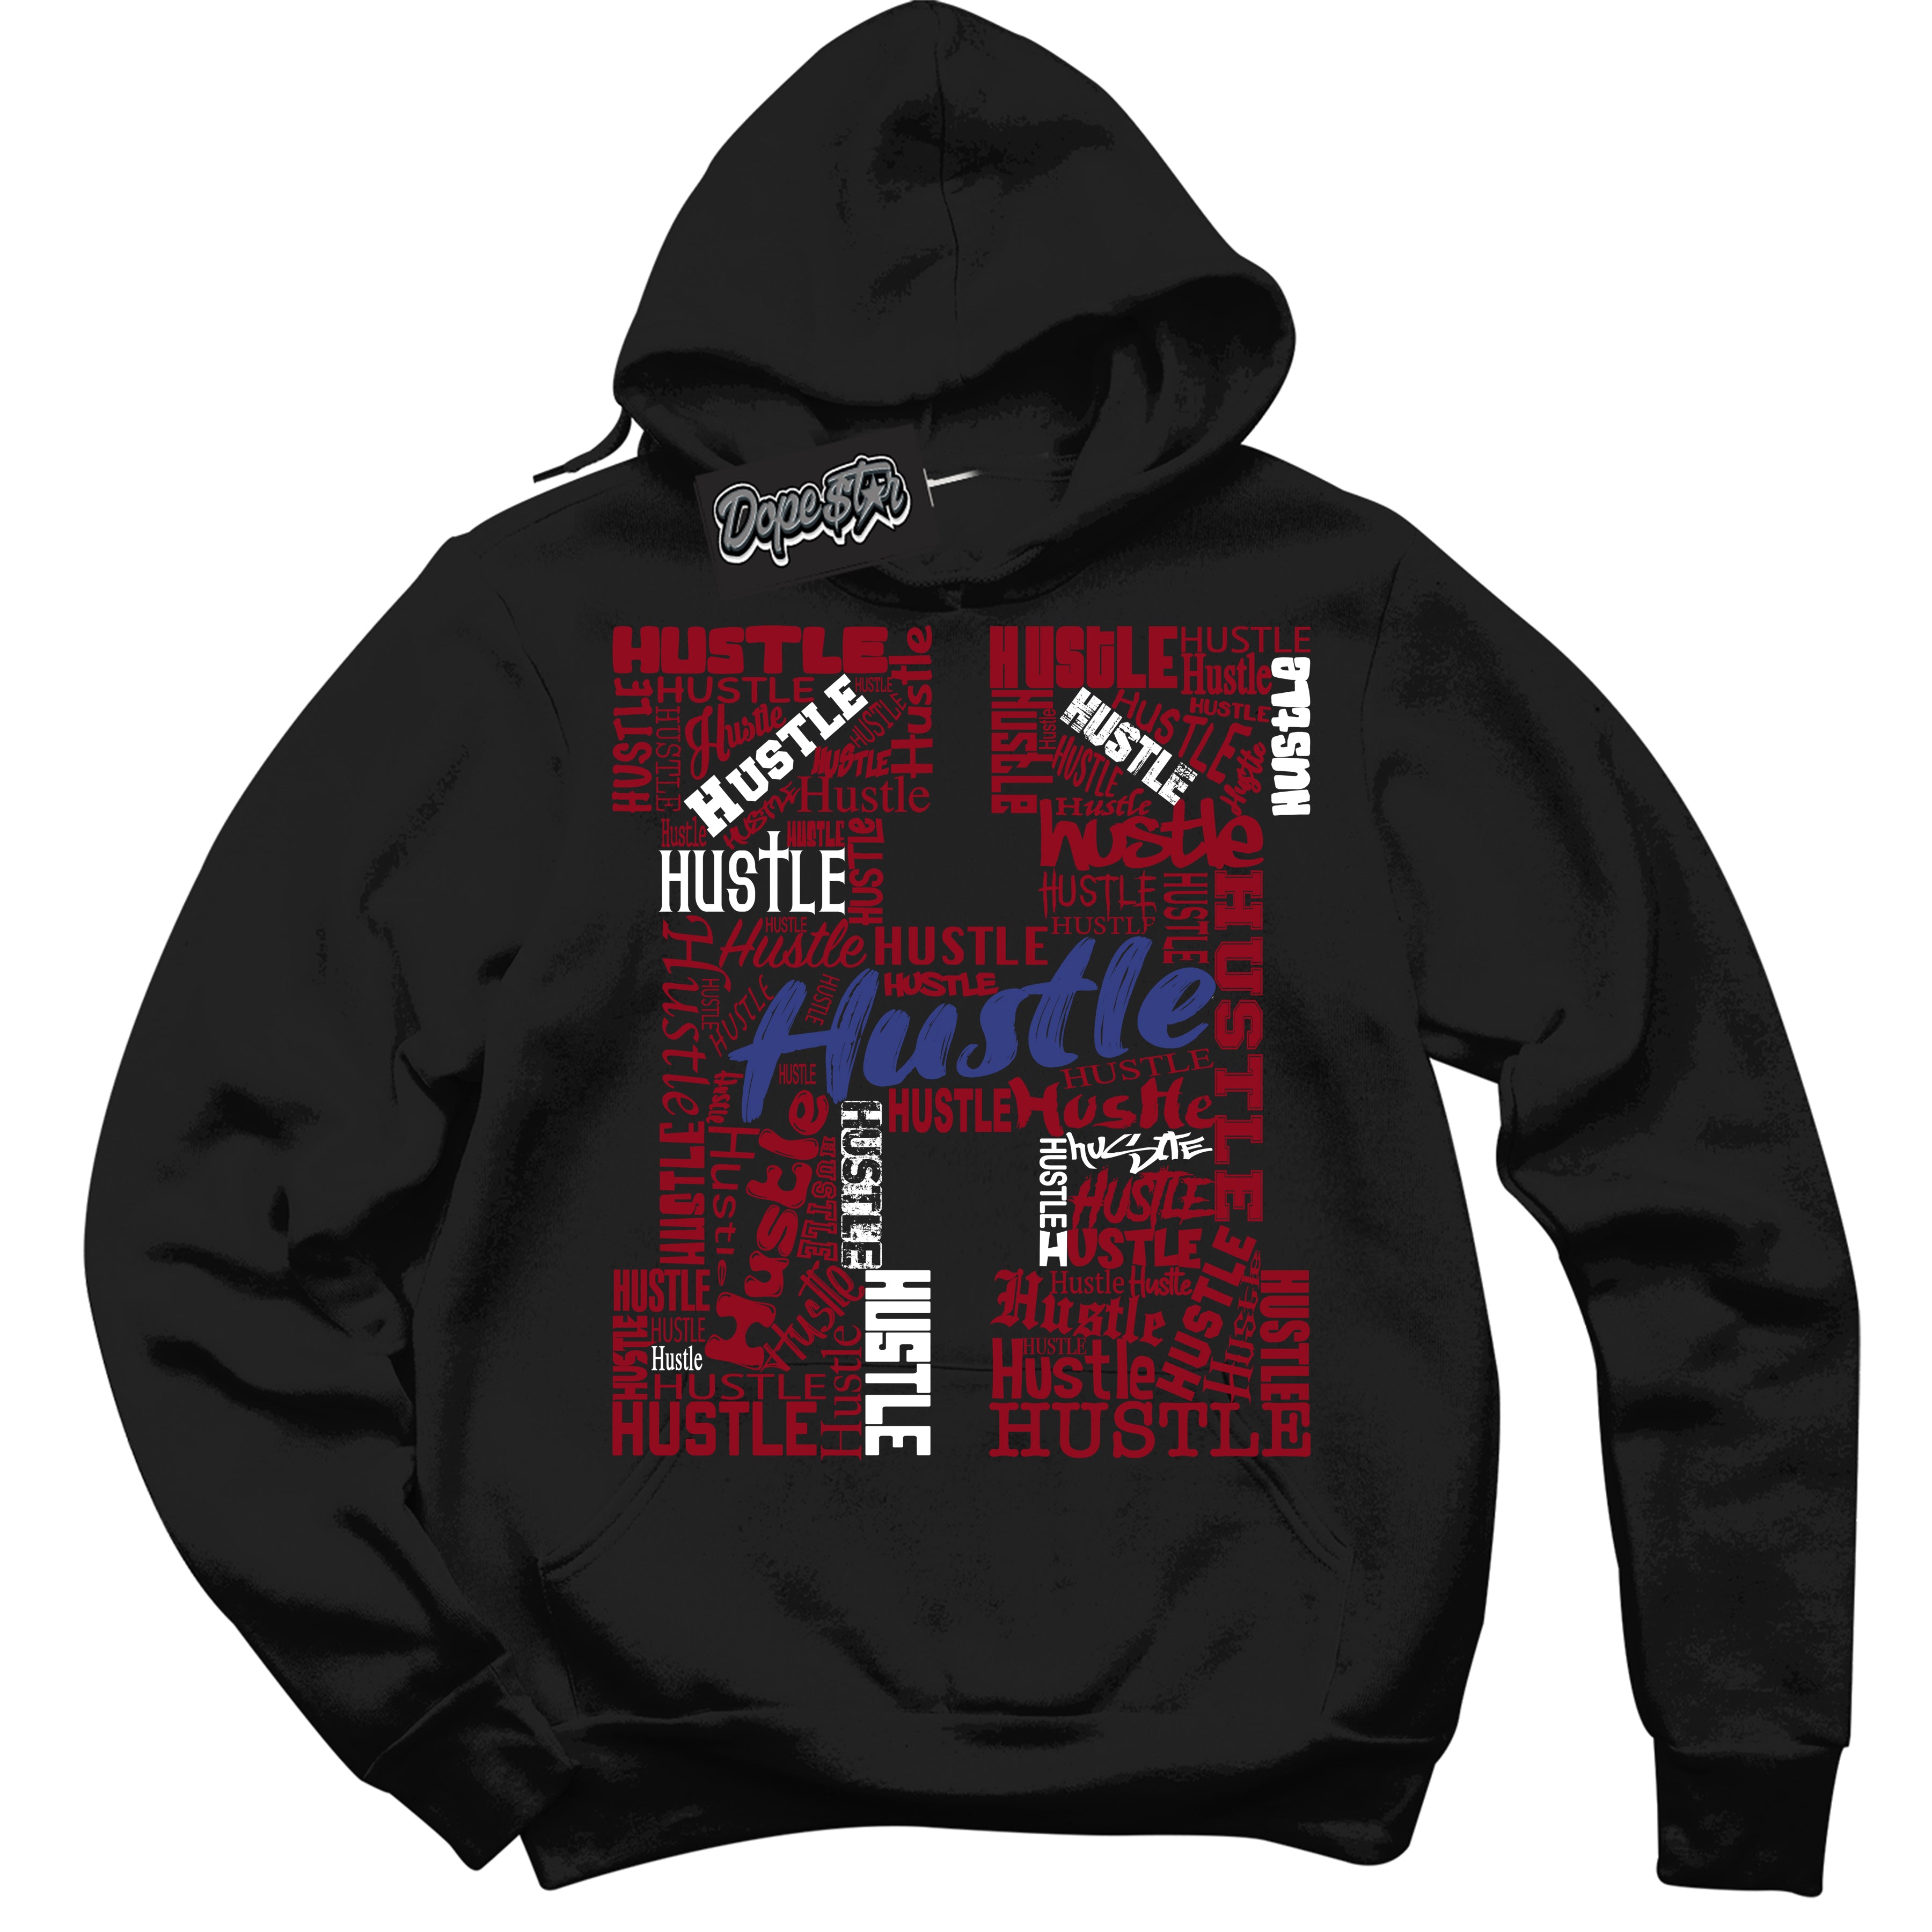 Cool Black Hoodie with “ Hustle H ”  design that Perfectly Matches Playoffs 8s Sneakers.